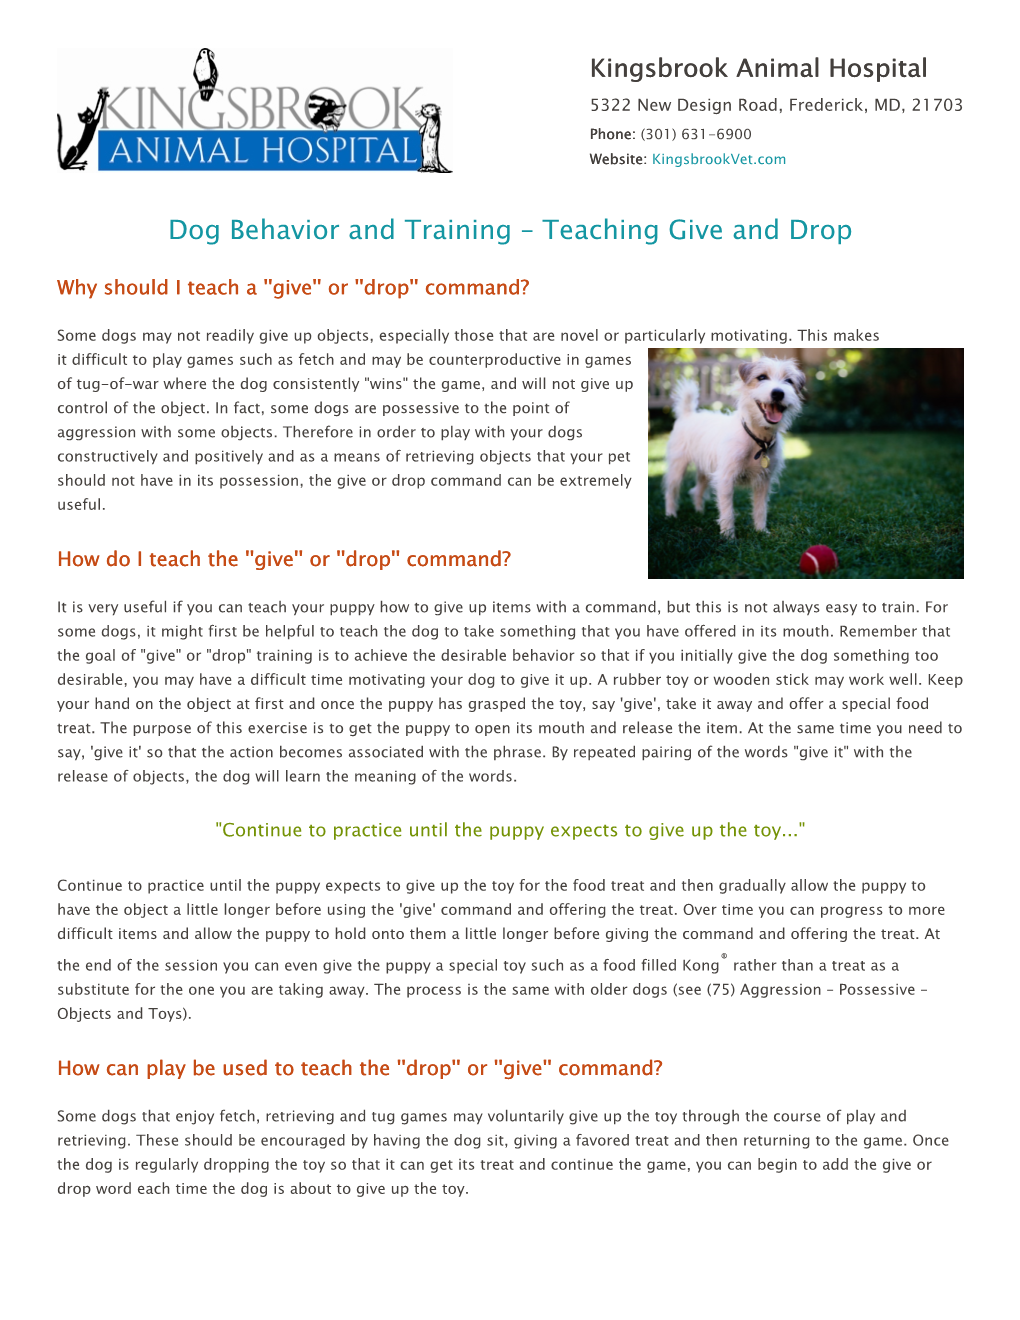 Dog Behavior and Training – Teaching Give and Drop